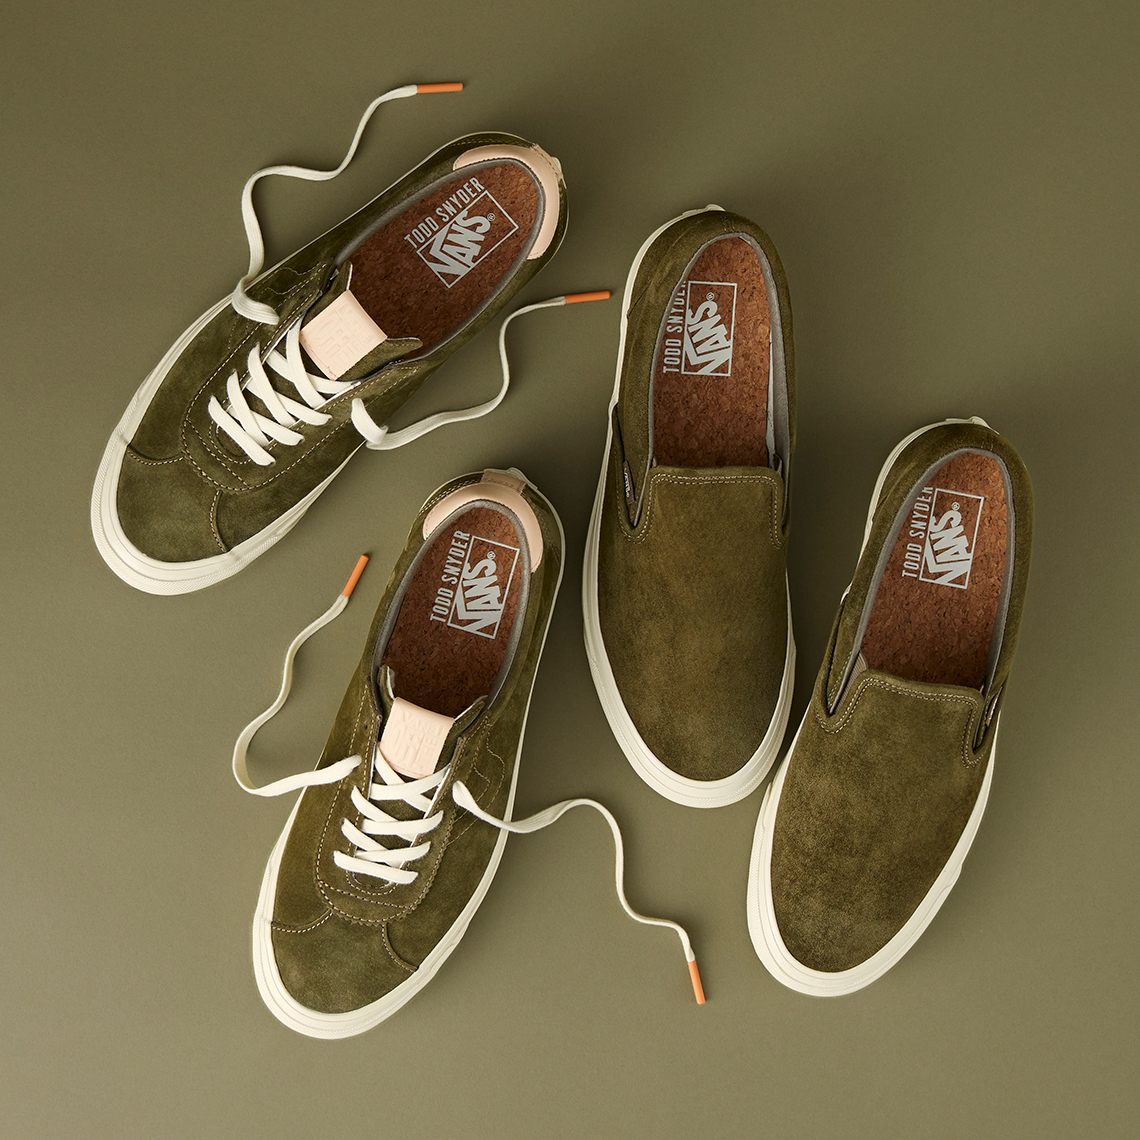 Todd Snyder Vans The Dirty Martini Release Date 5